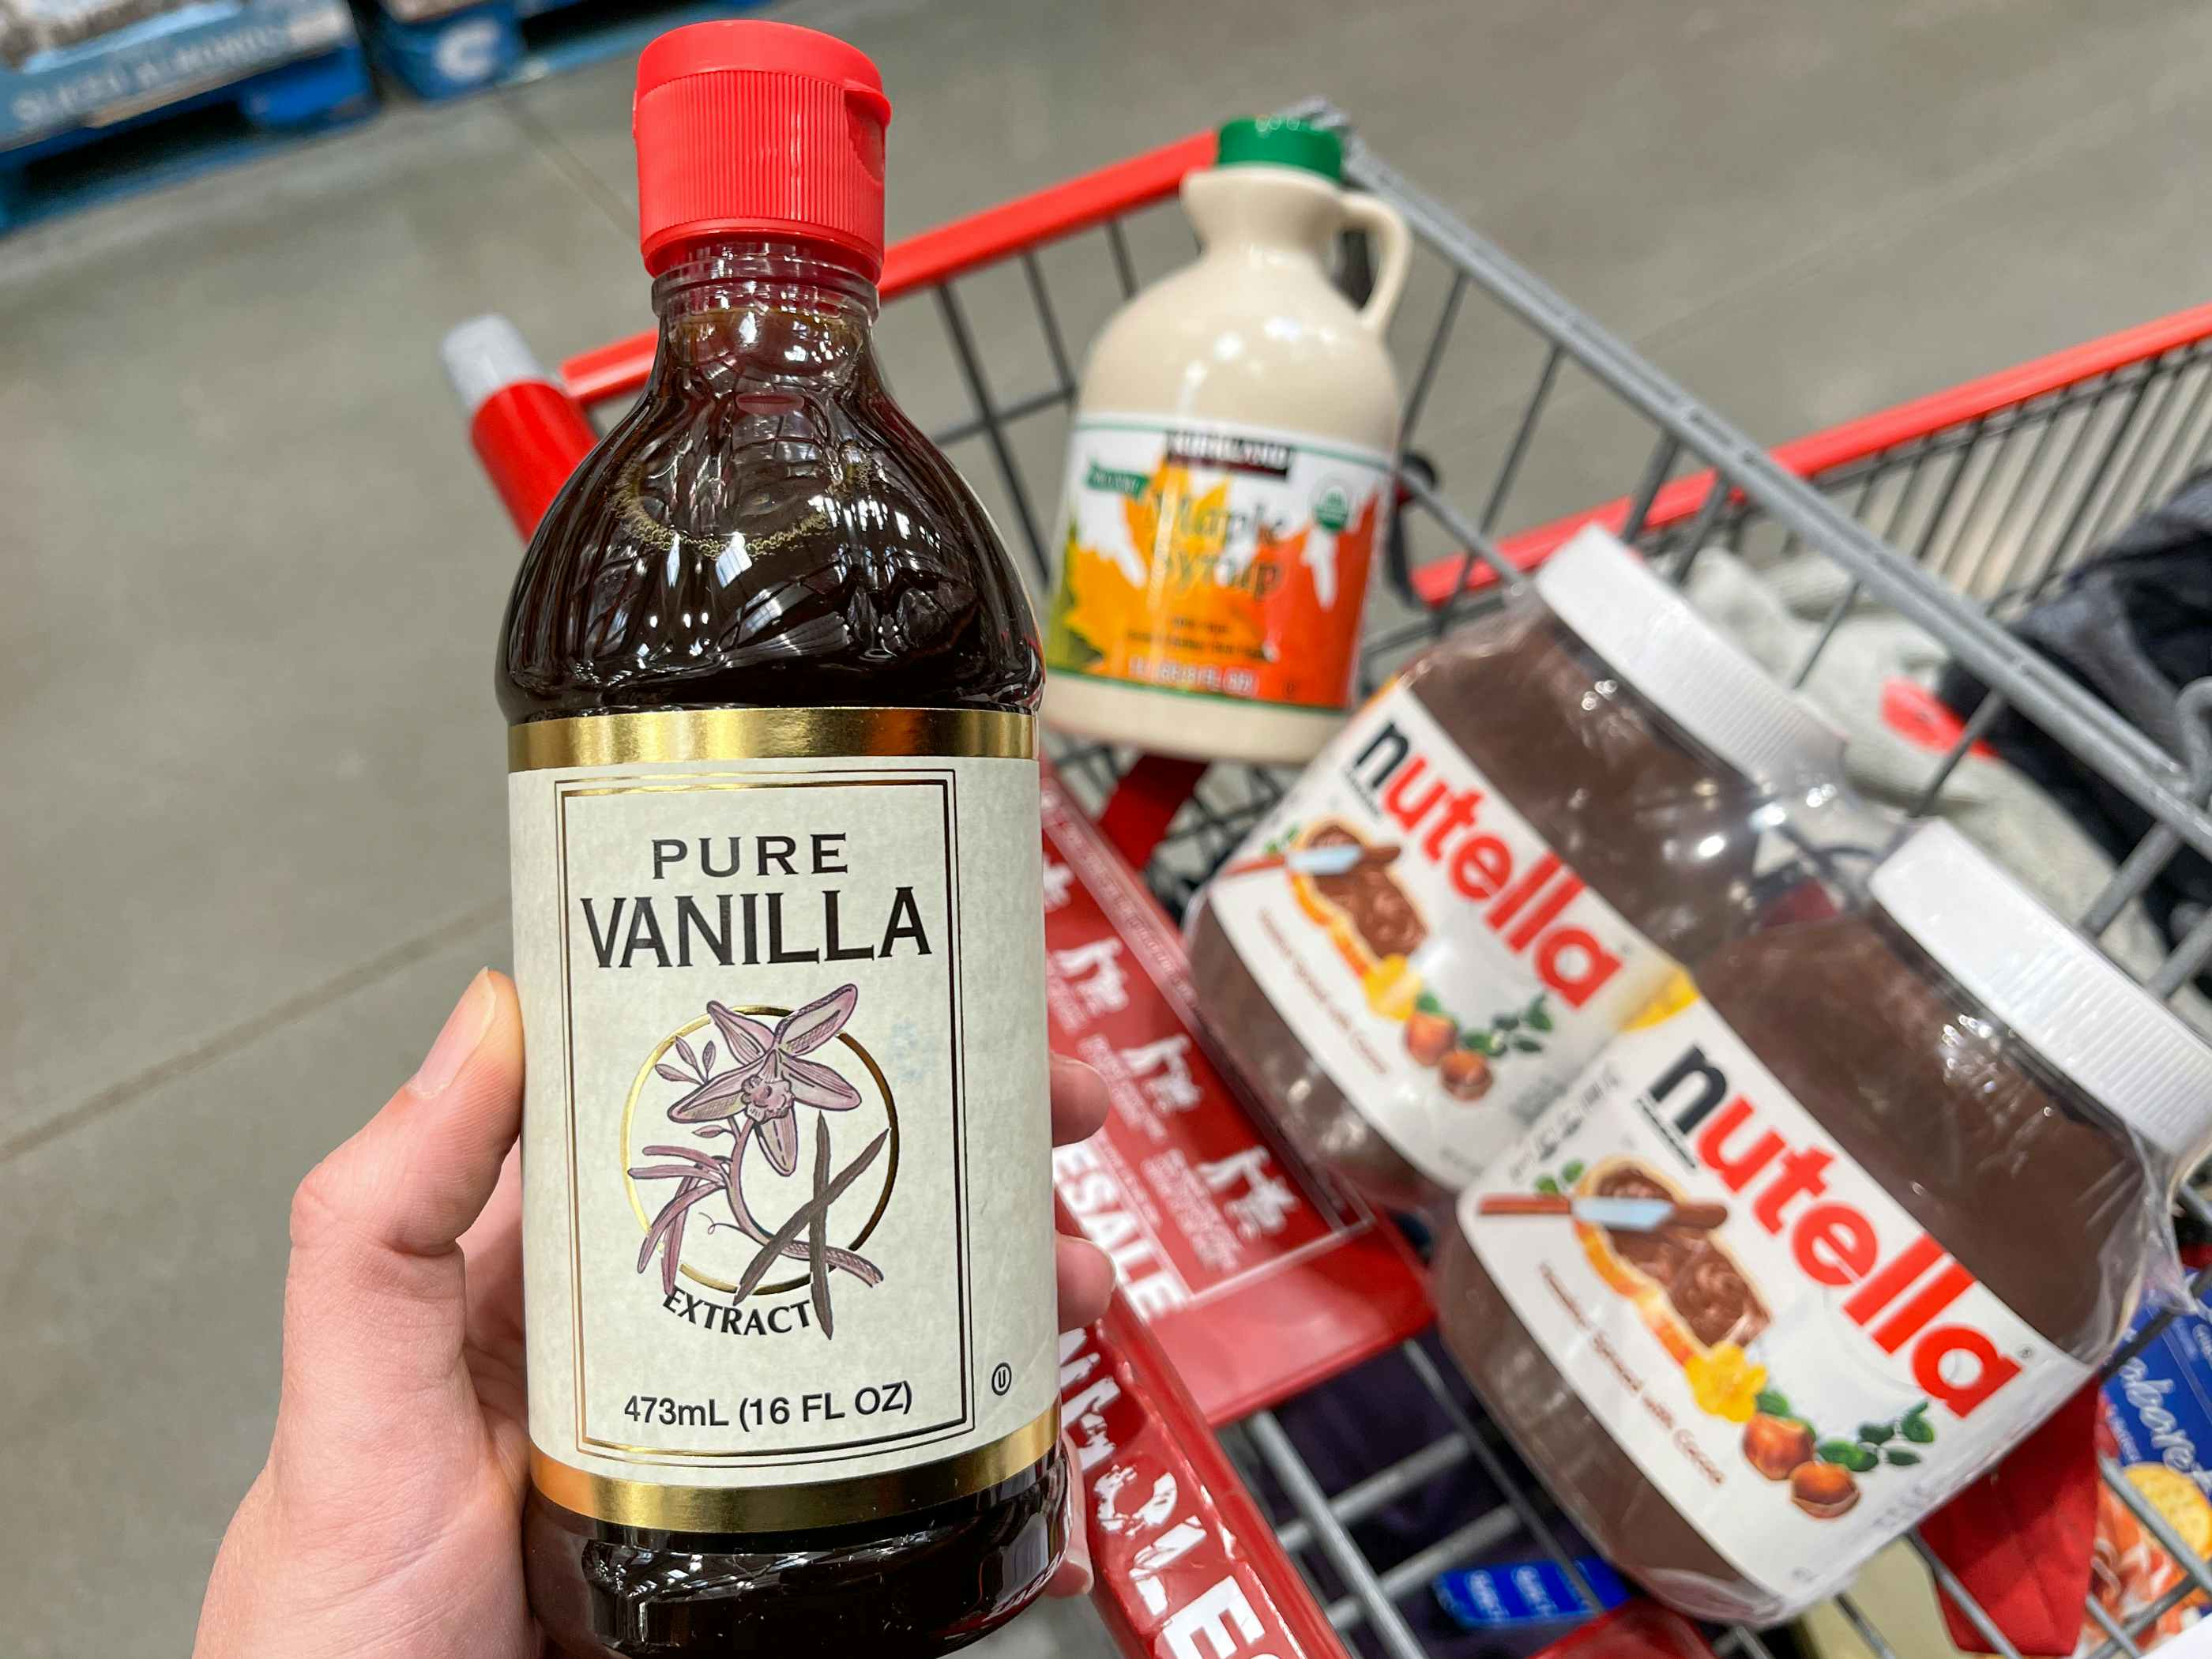 Vanilla, maple syrup, and Nutella in a cart at Costco.